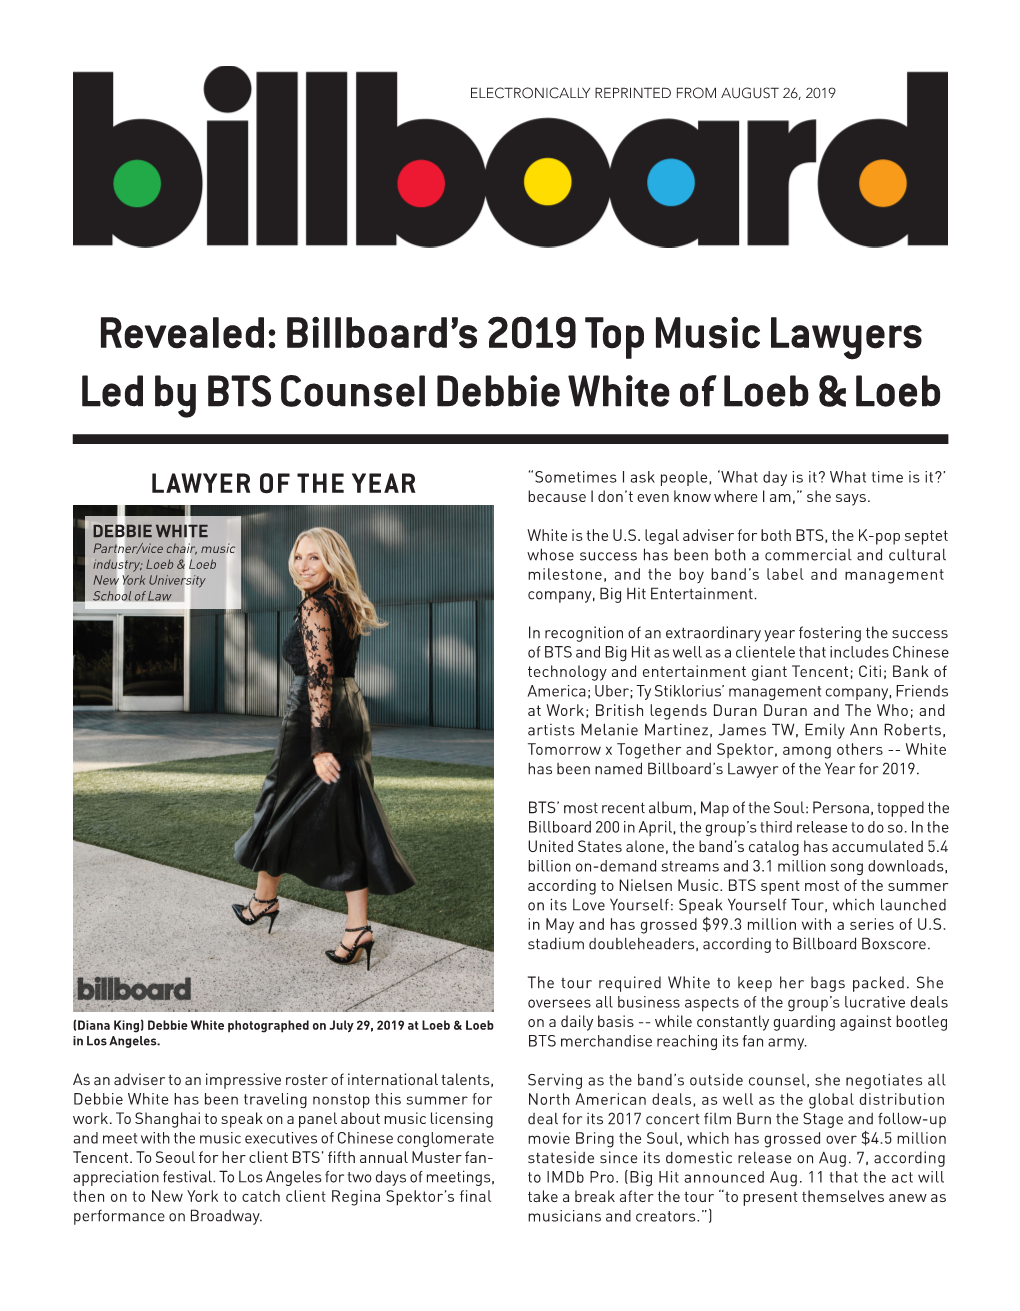 Revealed: Billboard's 2019 Top Music Lawyers Led by BTS Counsel